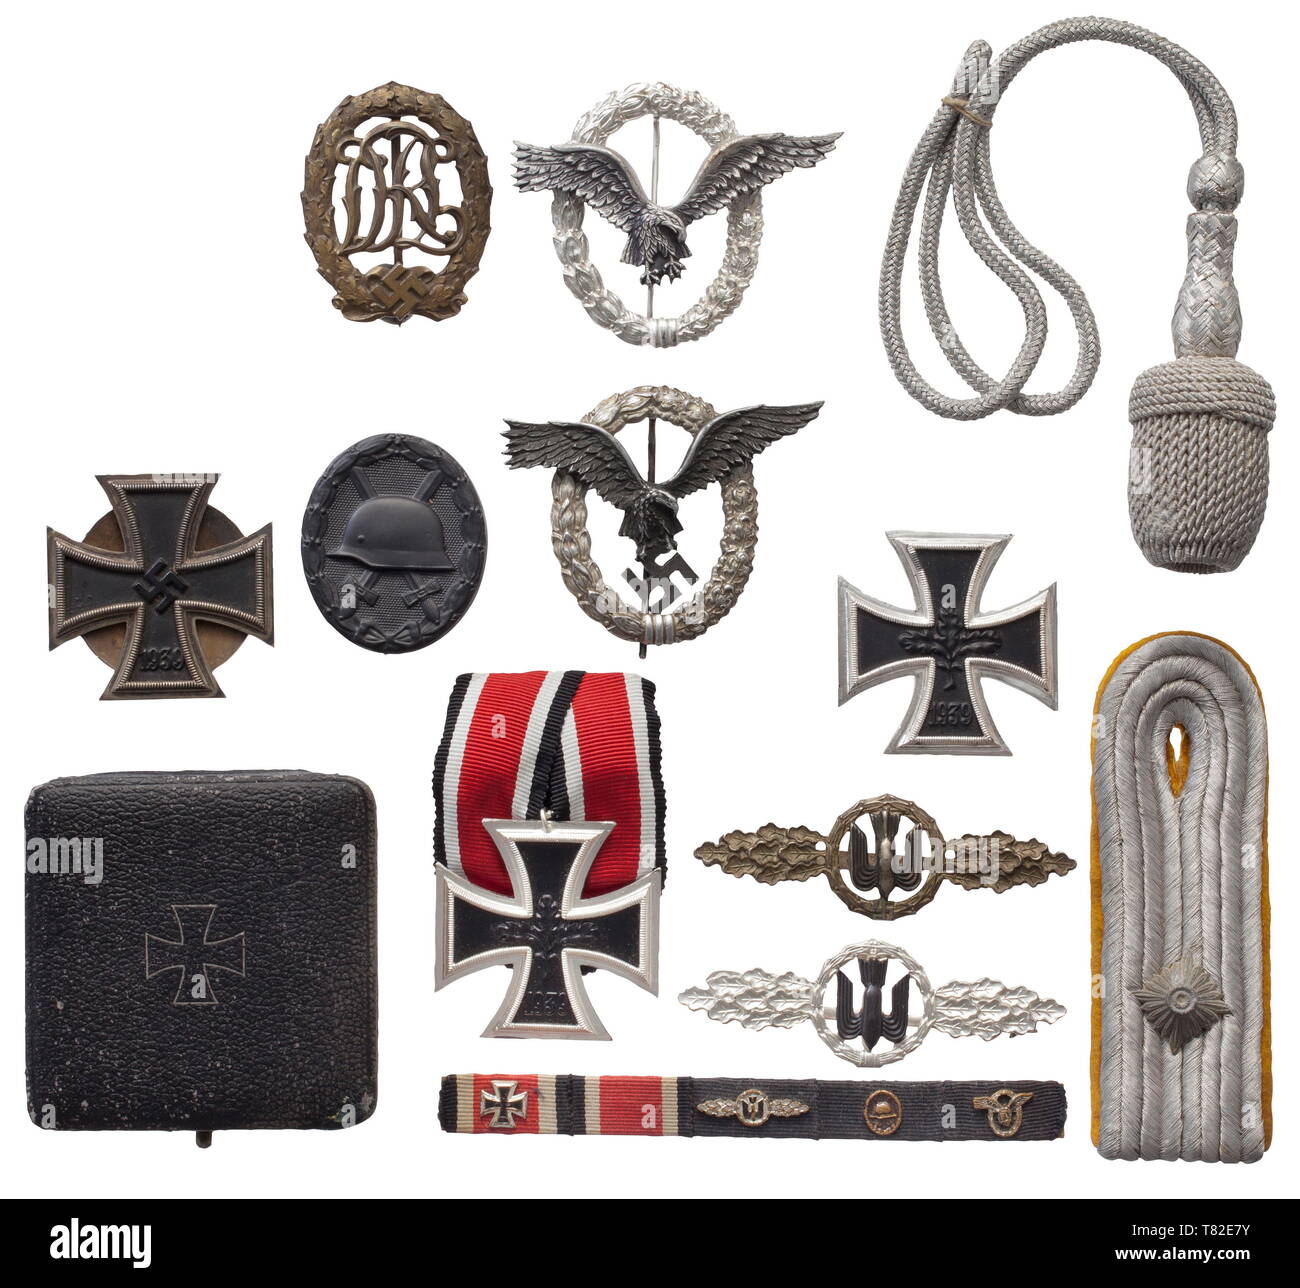 The estate of a Luftwaffe officer A Pilot's Badge in aluminium issue (rare), a Squadron Clasp for Bomber Pilots in Bronze, an Iron Cross 1st Class with threaded disc attachment, a case for an EK 1 and a Reich Sports Badge. Included is a field orders clasp in 1957 issue with all corresponding decorations. Also, a shoulder board for an Oberleutnant and a sword knot for the Luftwaffe dagger. In addition, two uniform jackets for an Oberstleutnant in the Bundeswehr of Luftwaffe blue cloth with silk liners and silver-embroidered cuff titles as well as the matching trousers. histo, Editorial-Use-Only Stock Photo